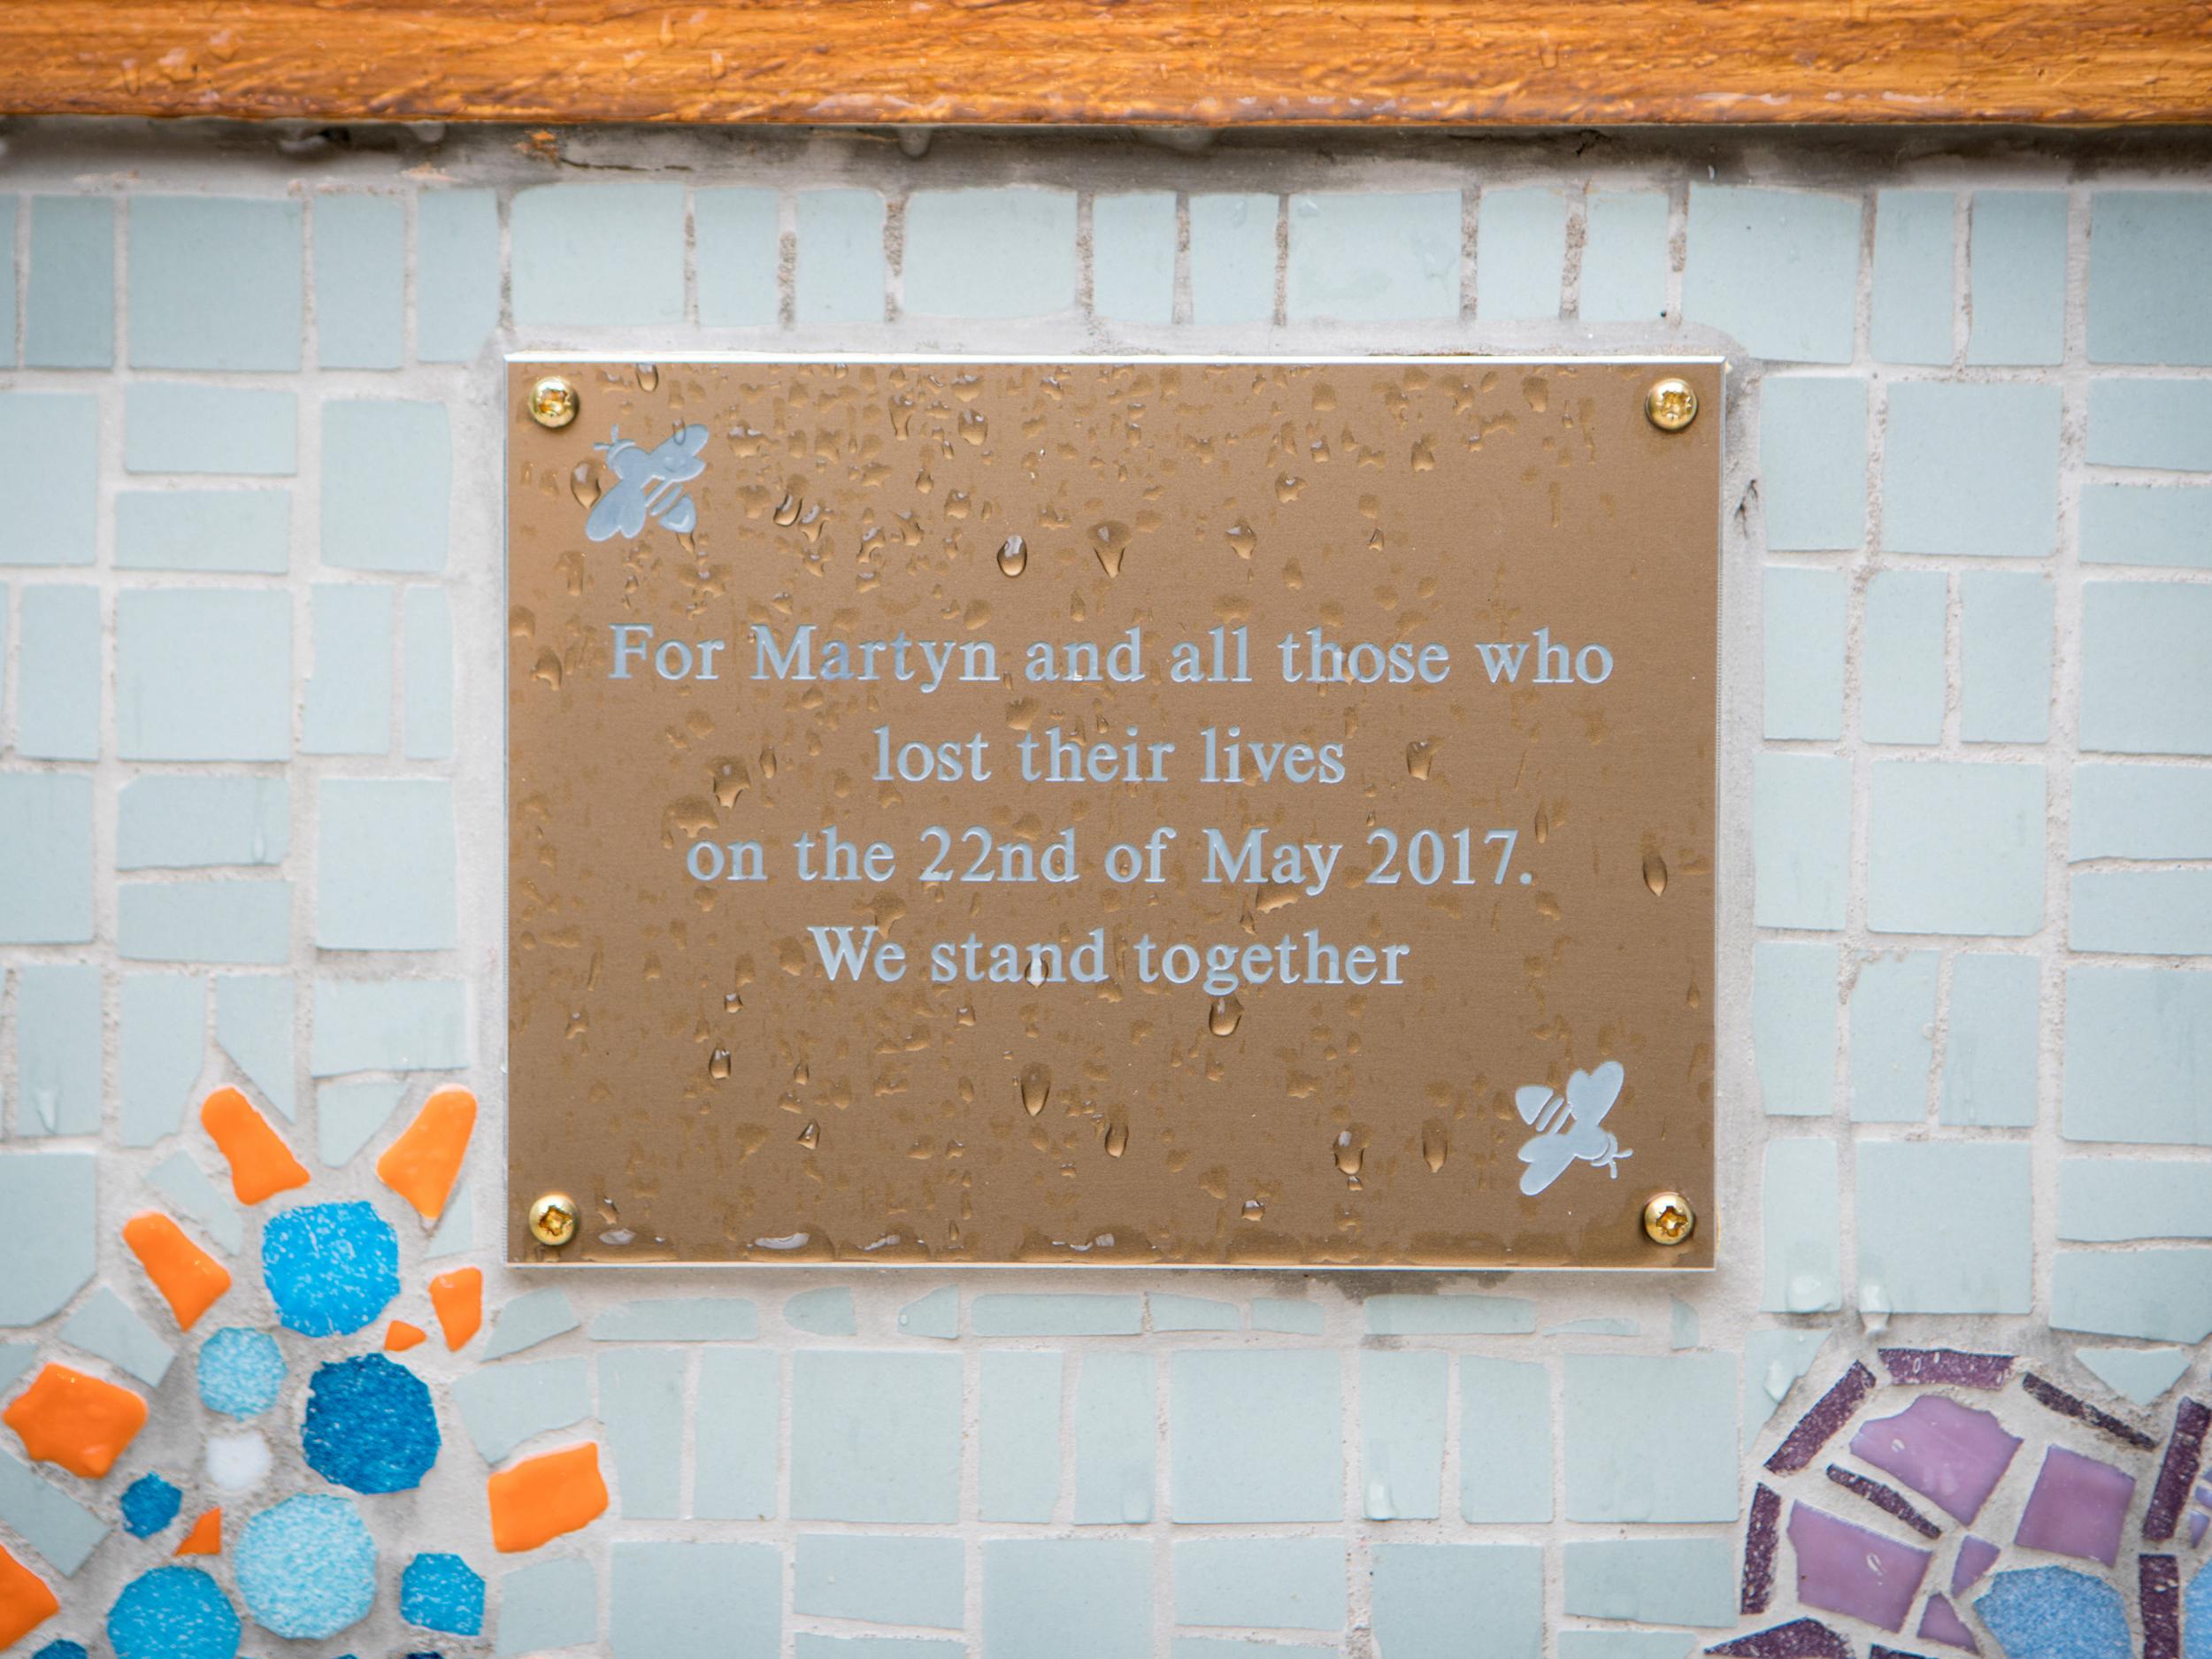 The plaque is affixed to a bench in a newly unveiled part of the 'Coronation Street' set